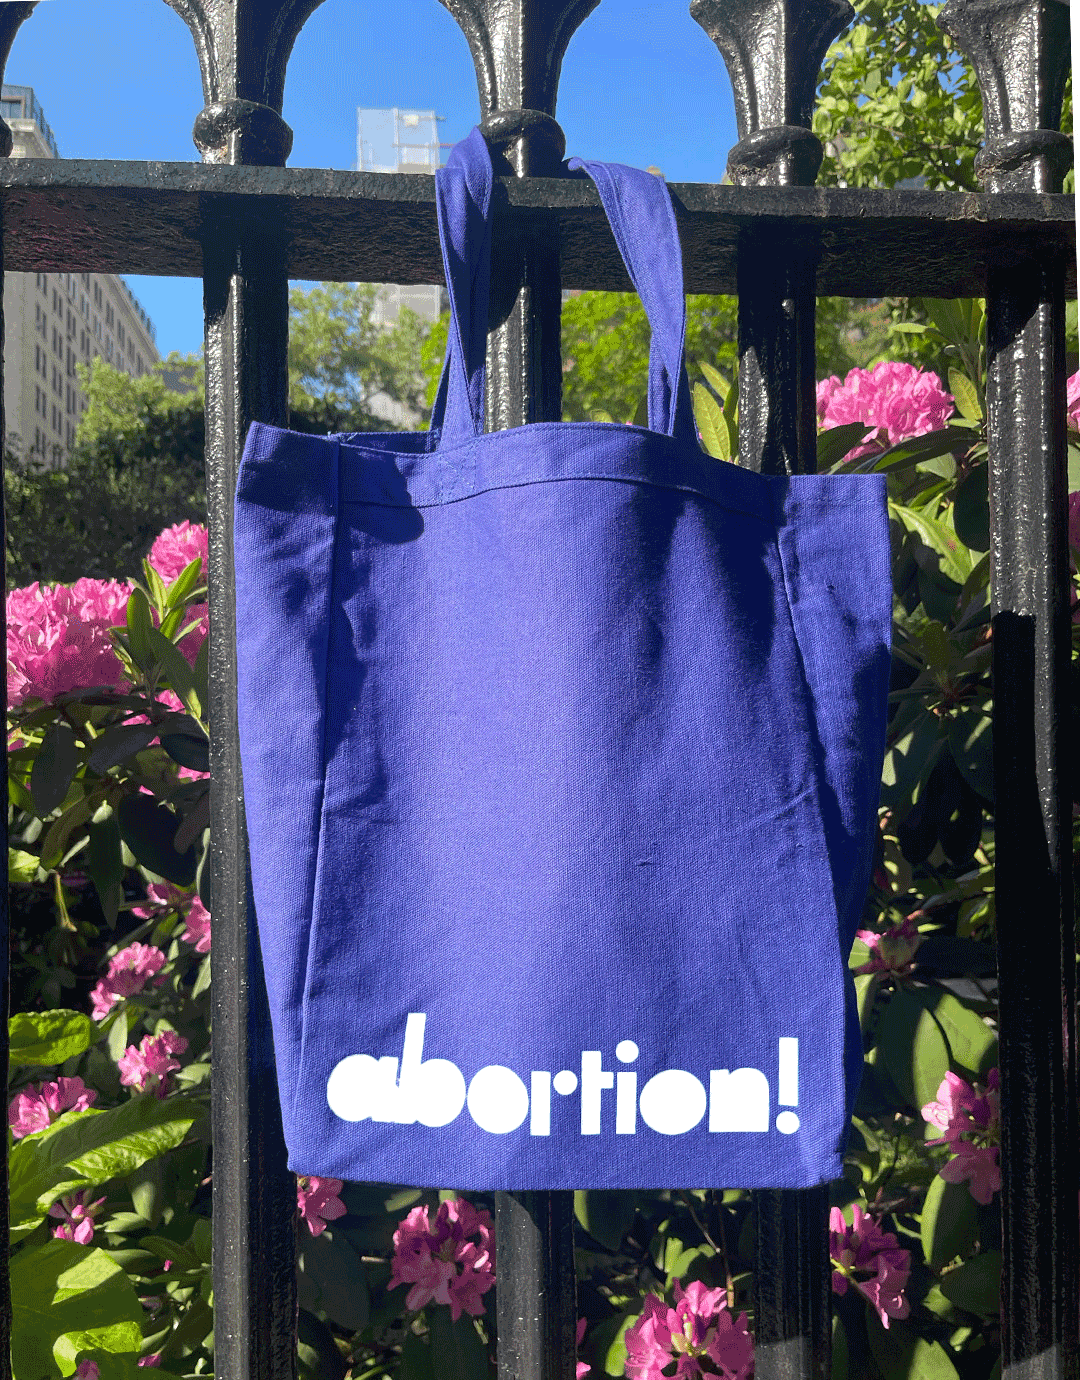 Abortion! Tote